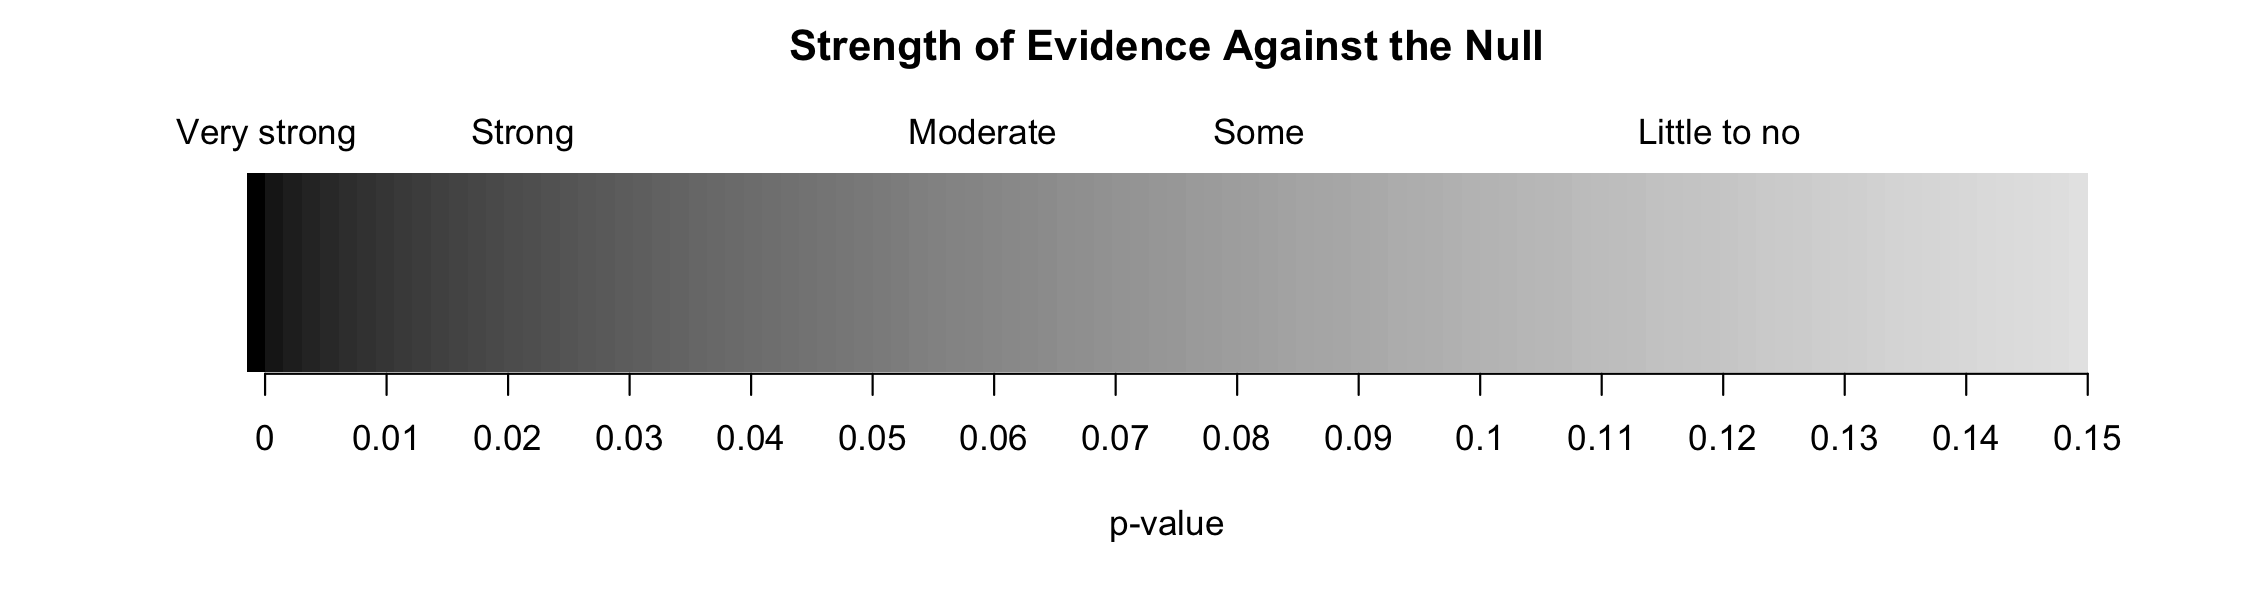 Strength of evidence against the null for a continuum of p-values. Once the p-value is beyond around 0.10, the data provide no evidence against the null hypothesis.